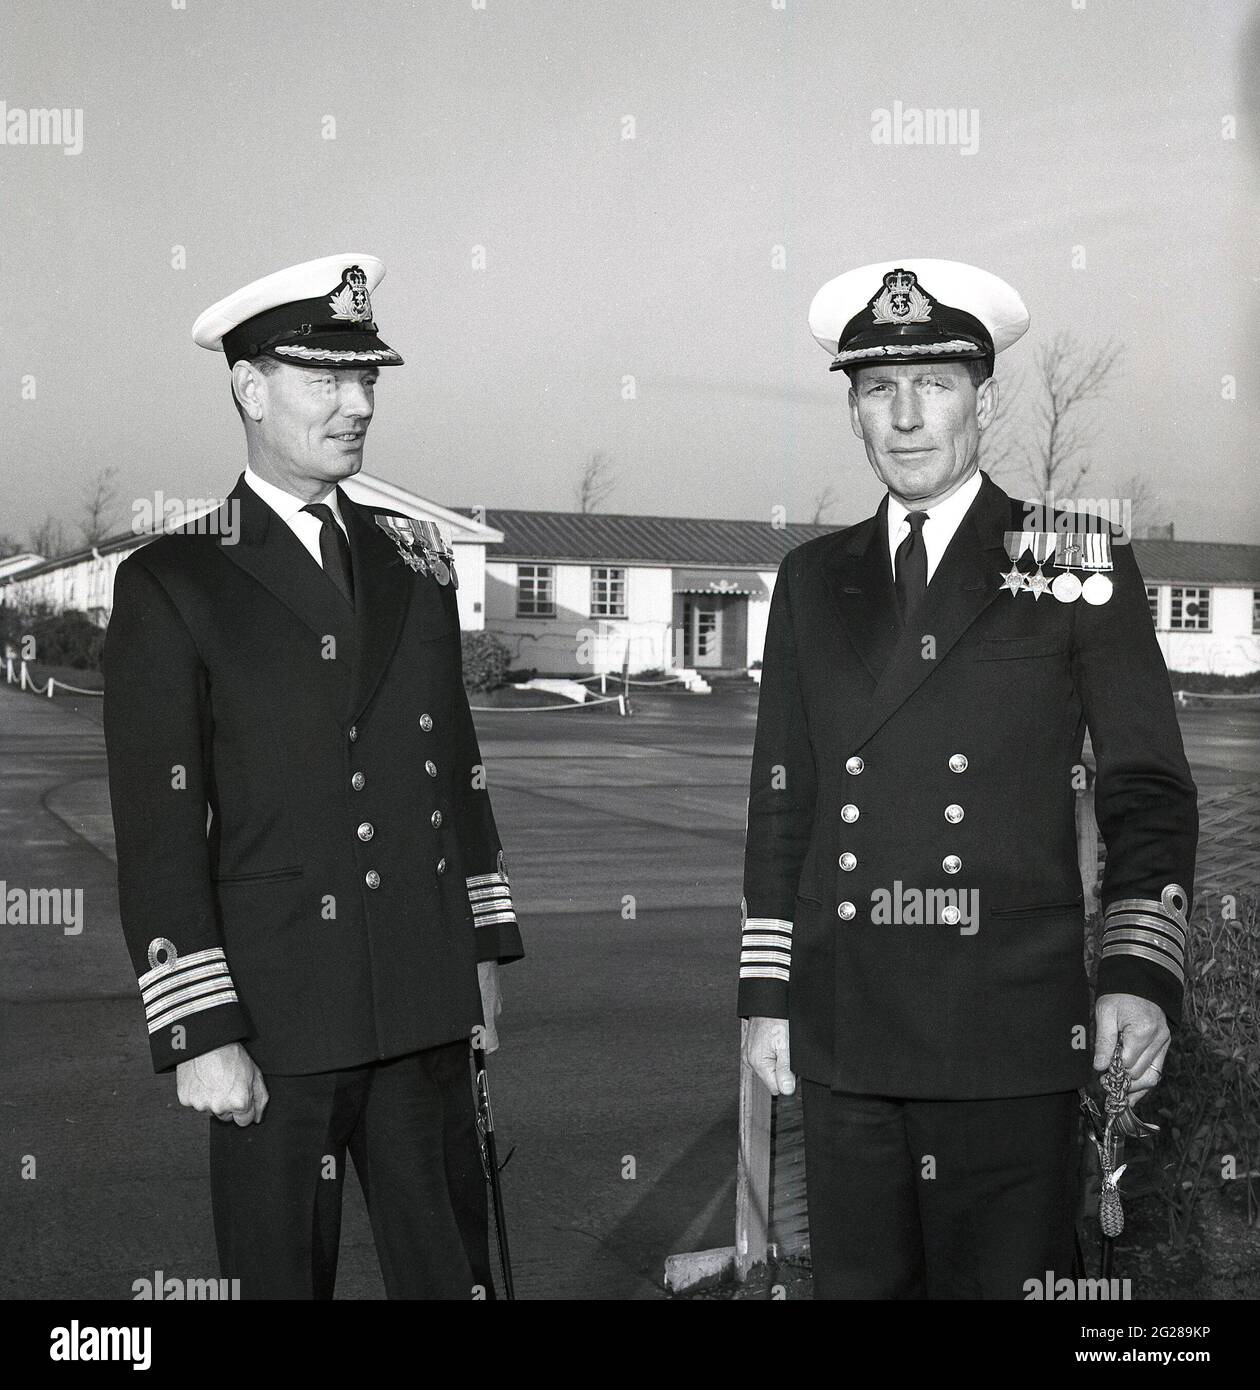 1960s, historical, outside HMS Caledonia, two decorated Royal Naval Captains in full uniform pose for a photograph in a hand-over of command, Fife, Scotland. Captain (Capt) is a senior officer rank of the Royal Navy, above a Commander and below Commodore and has a NATO ranking code of OF-5. The rank is equivalent to a Colonel in the British Army and Royal Marines, and to a Group Captain in the Royal Air Force. HMS Caledonia was first opened in 1937 and was responsible for artificer apprentice training up to 1985, with many thousands of young men going through training. Stock Photo